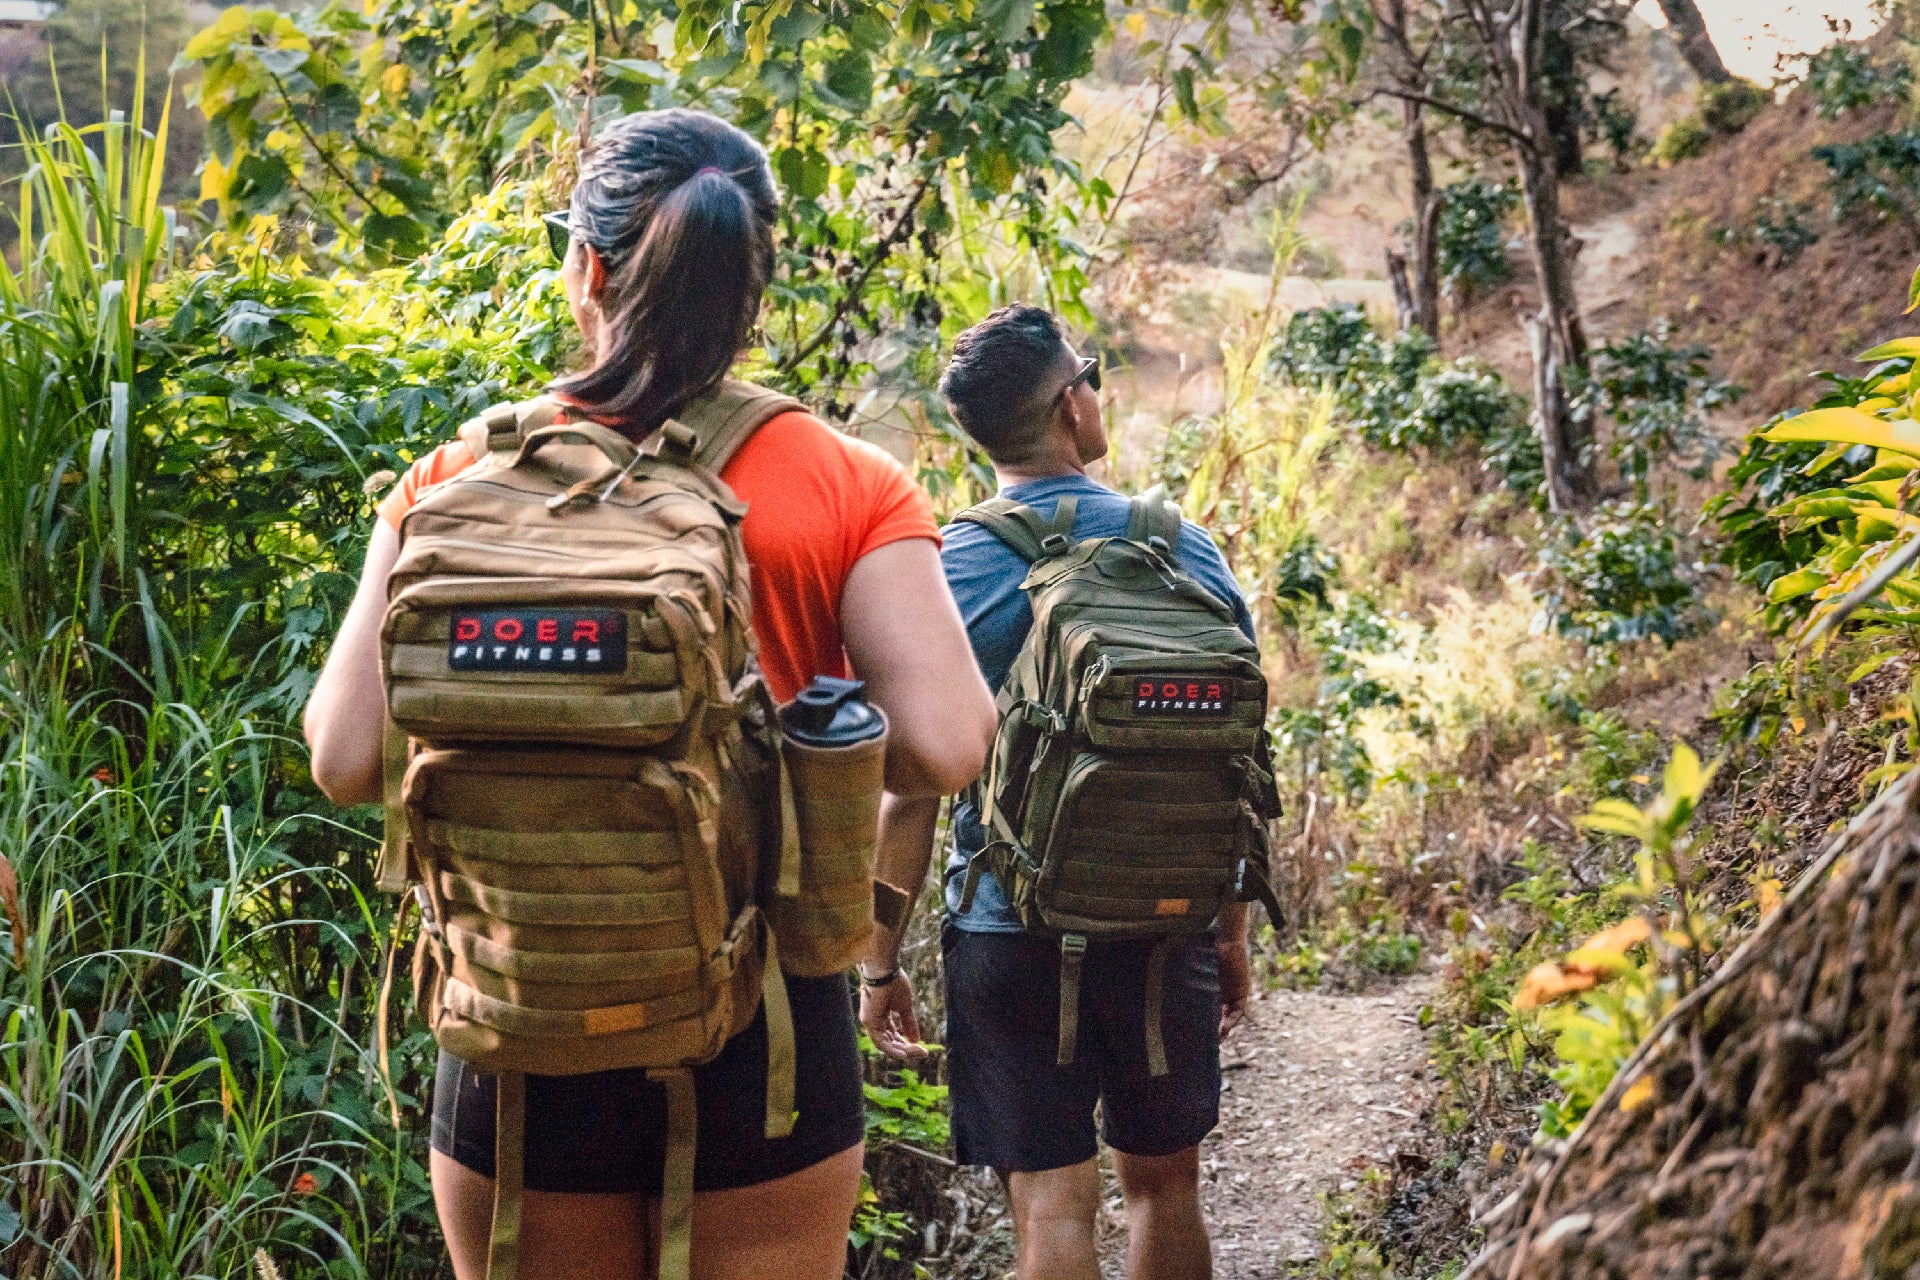 Two hikers wearing DOER tactical backpacks on a scenic hiking trail in Costa Rica.